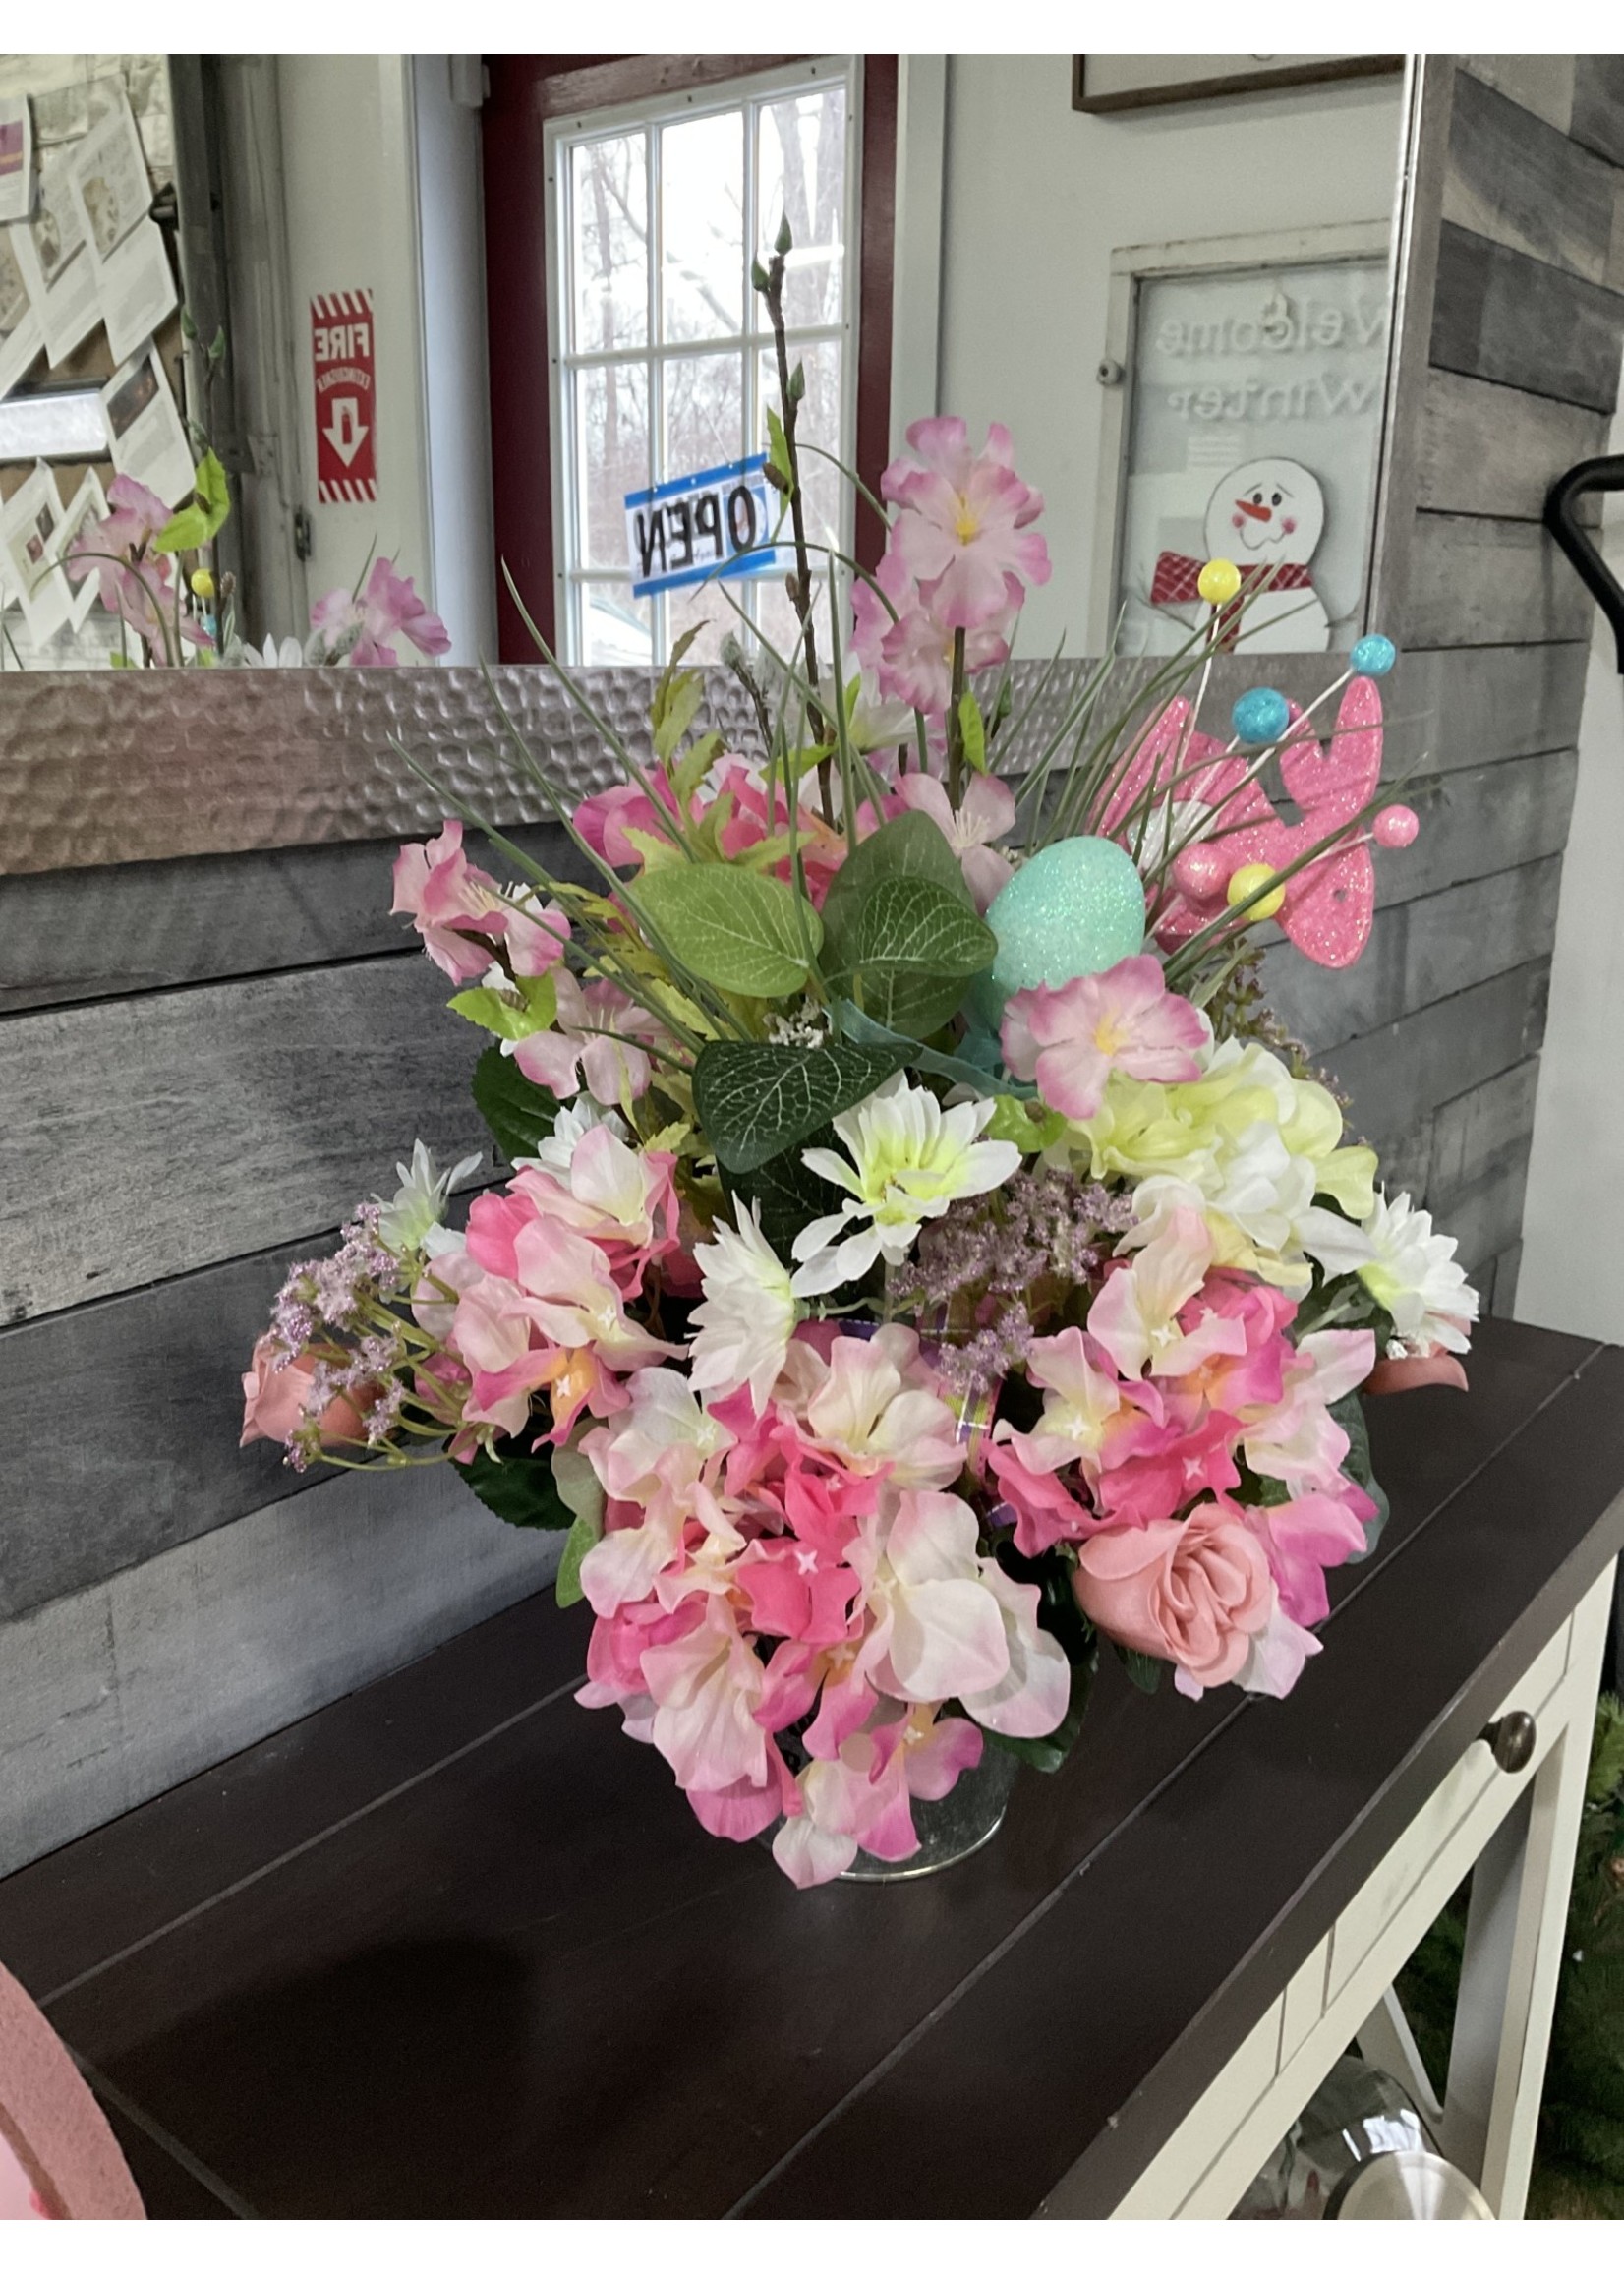 My New Favorite Thing Centerpiece Easter Pink Rabbit, Eggs and Pink Flowers